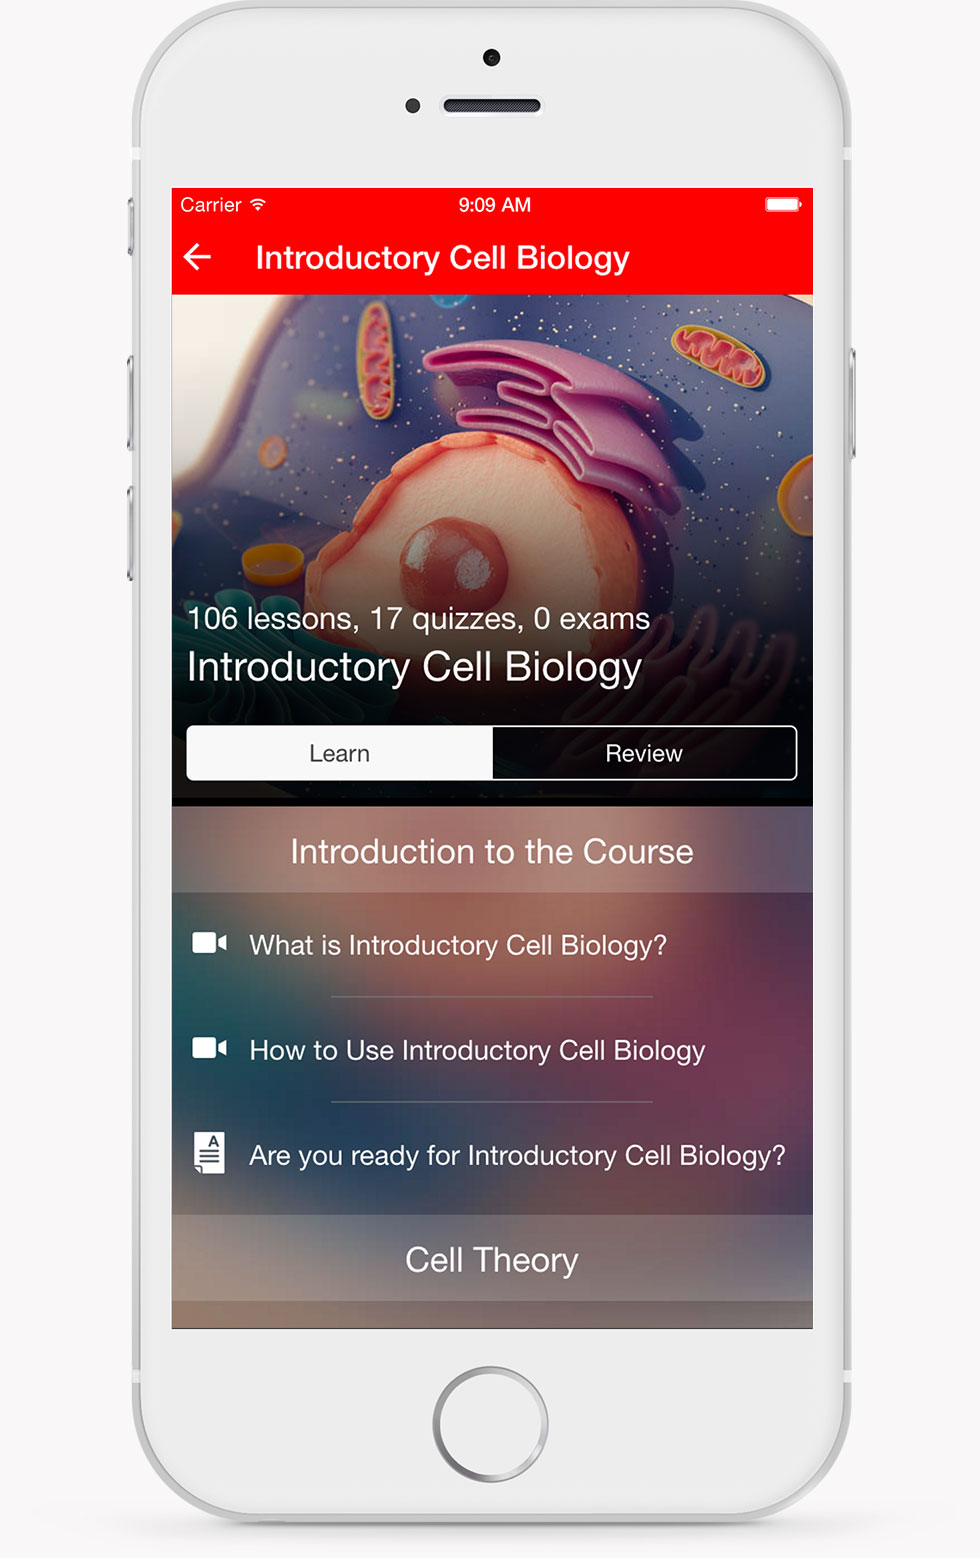 Introductory Cell Biology Learn Interface